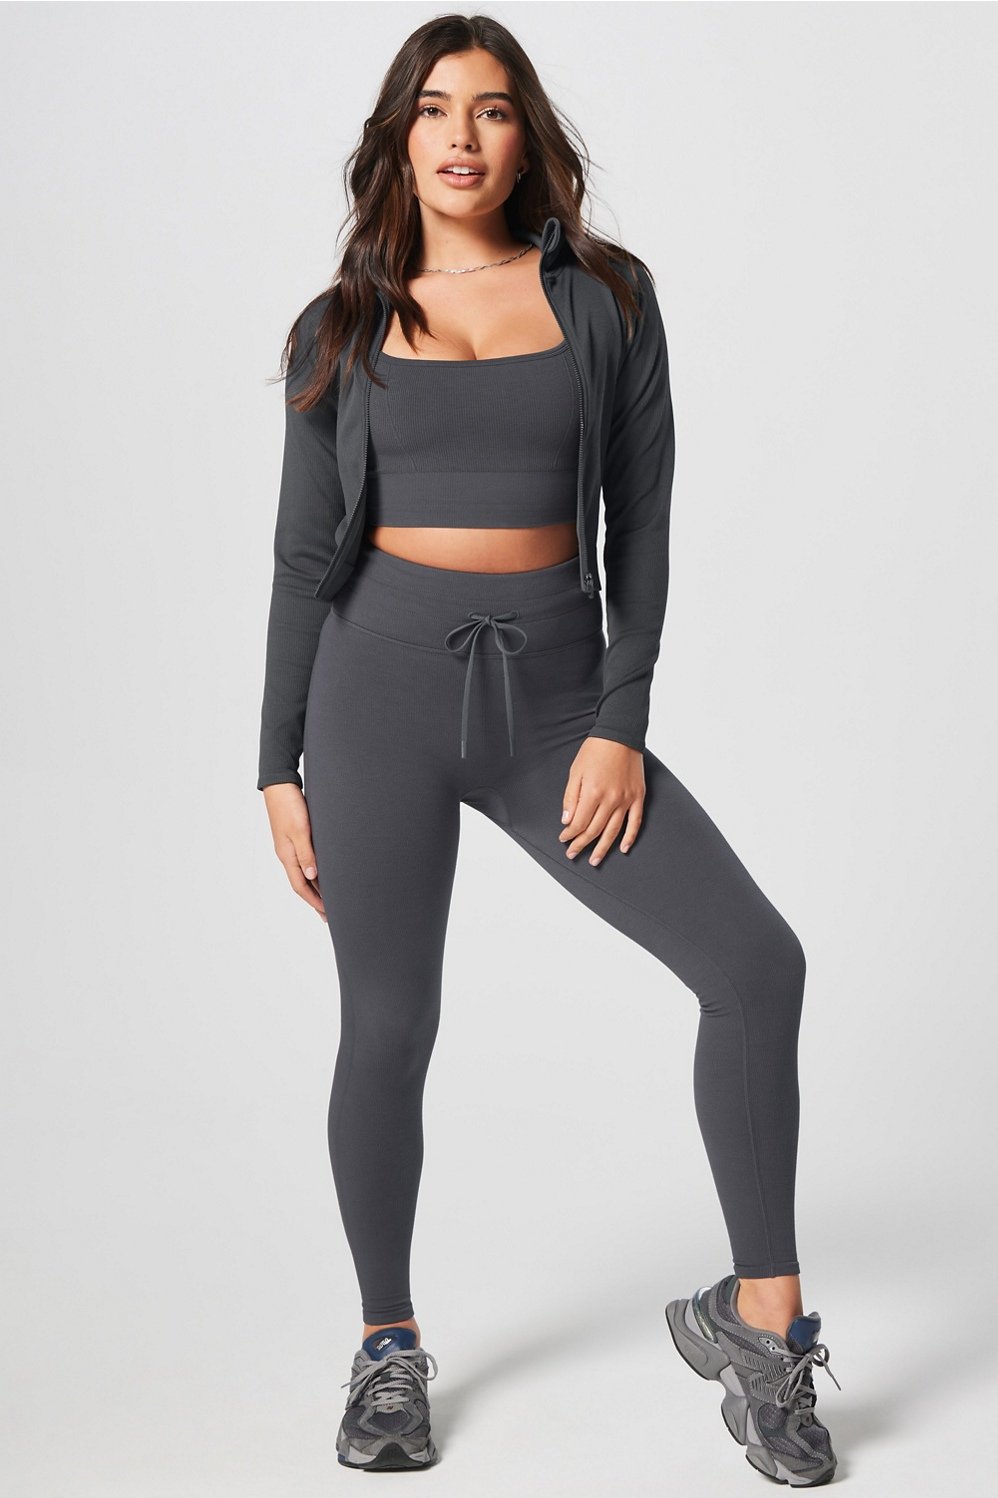 🥶 full look is from @fabletics !!! Shop this any many more using my link  FABLETICS.com/DRAYA #fableticsambassador